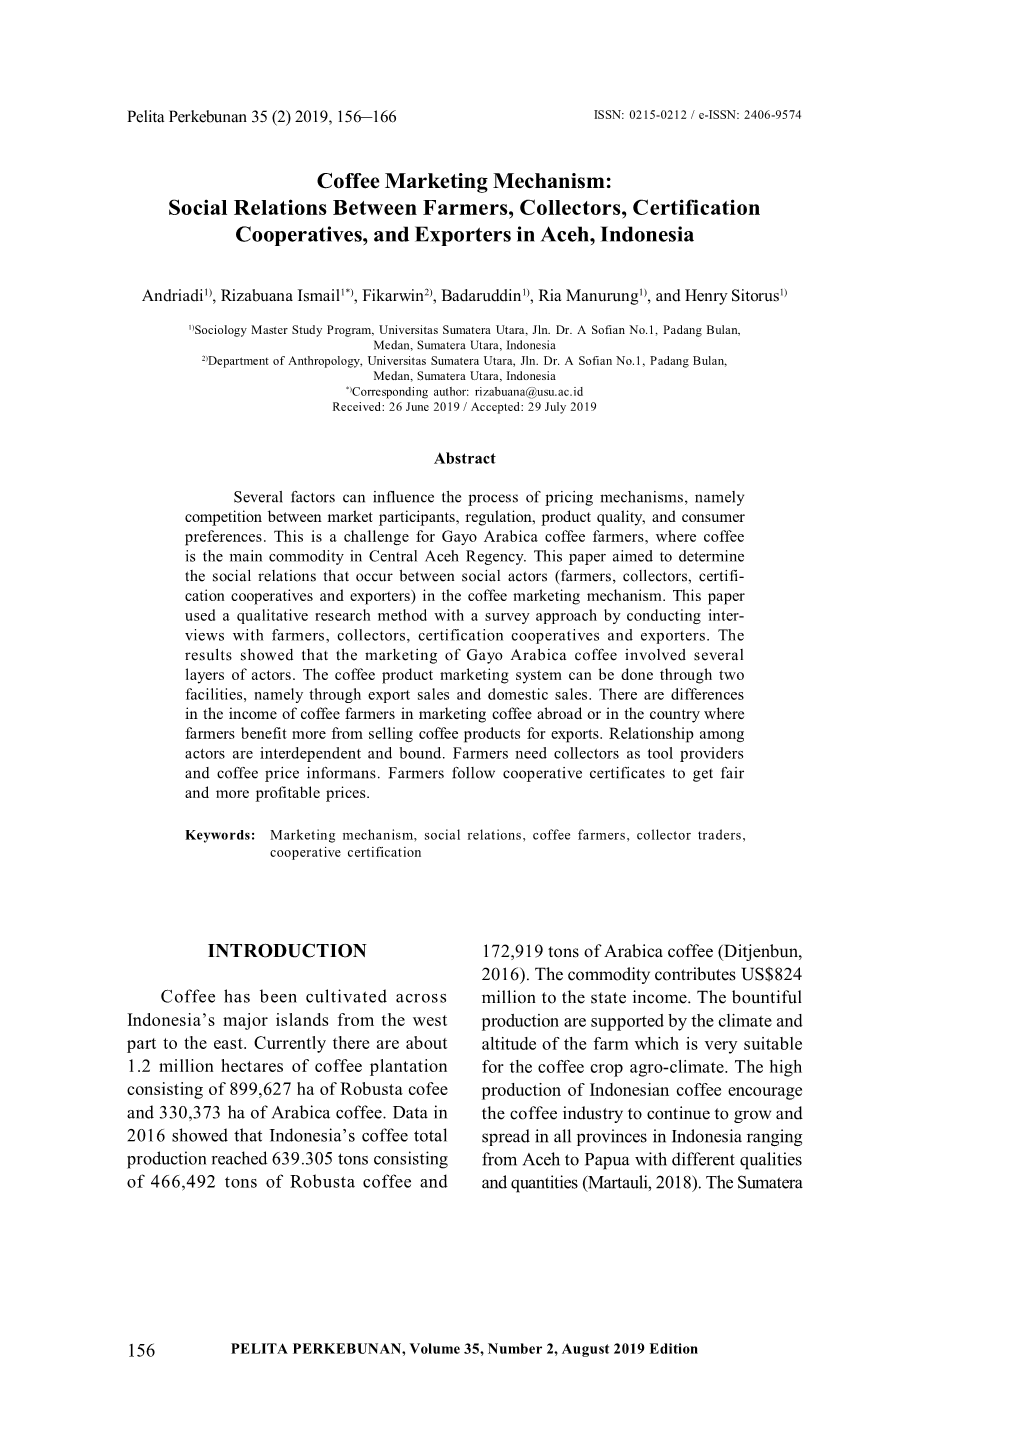 Coffee Marketing Mechanism: Social Relations Between Farmers, Collectors, Certification Cooperatives, and Exporters in Aceh, Indonesia